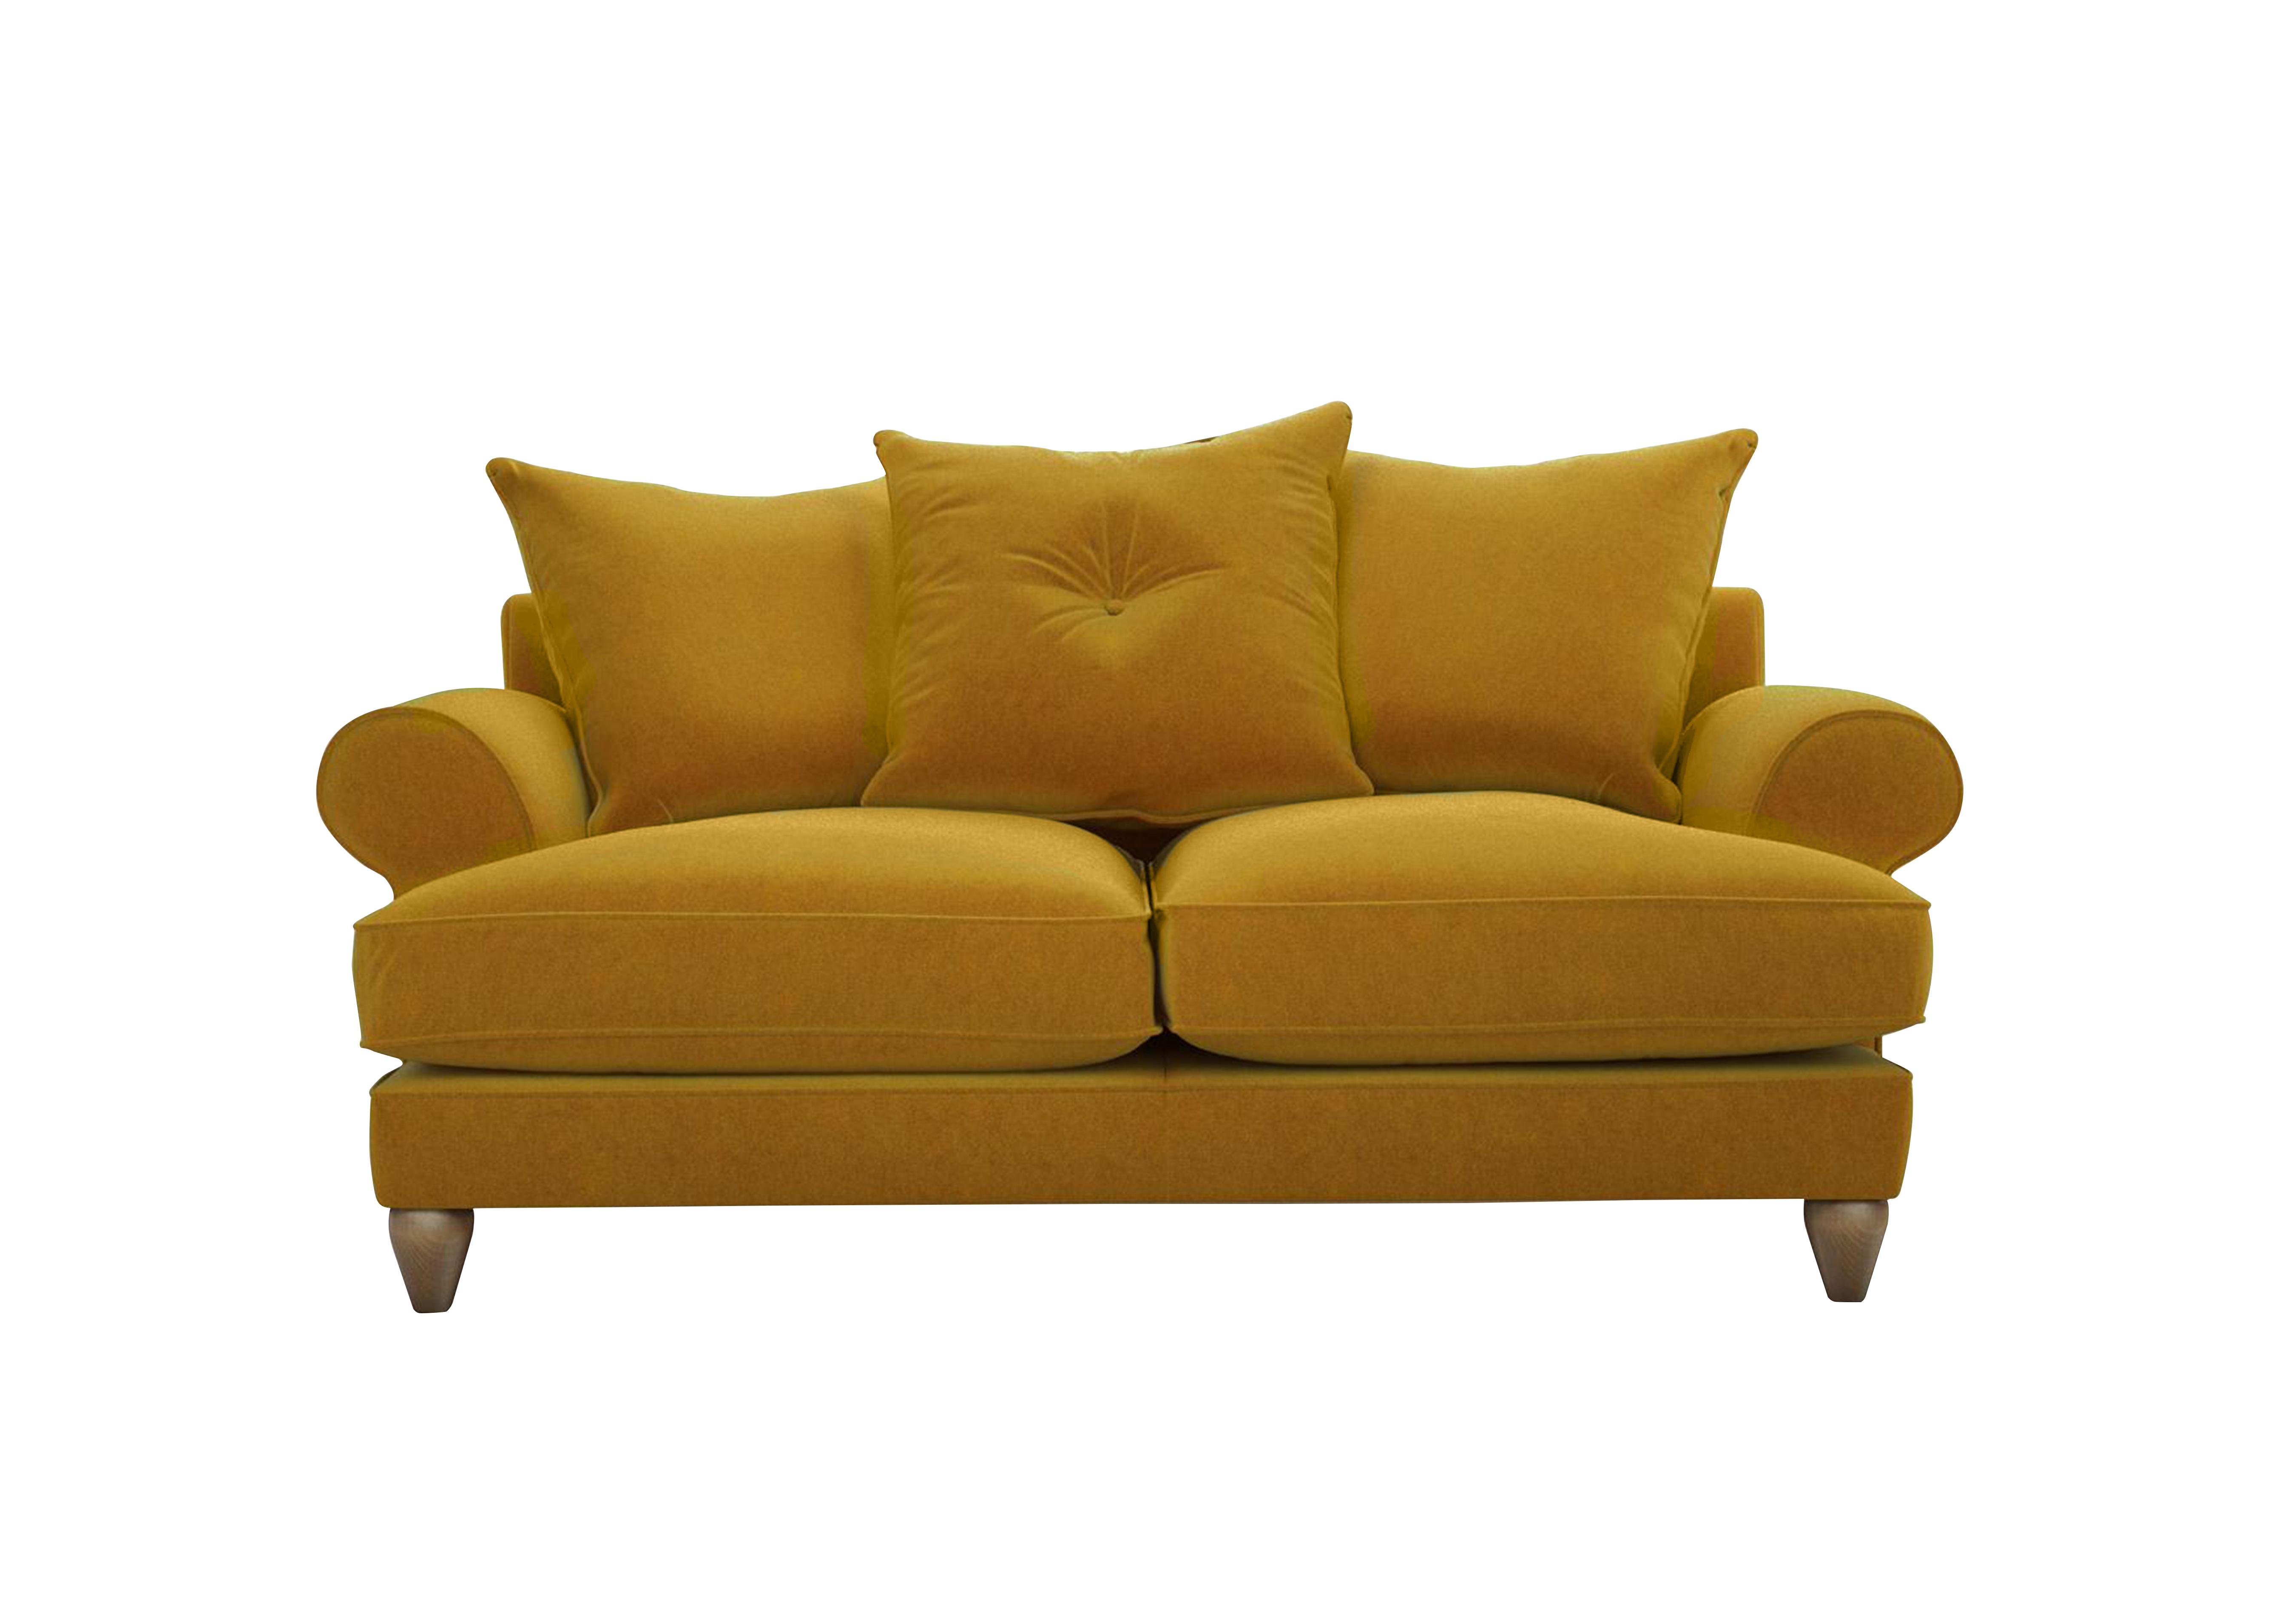 Bronwyn 2.5 Seater Fabric Scatter Back Sofa in Gol204 Golden Spice on Furniture Village